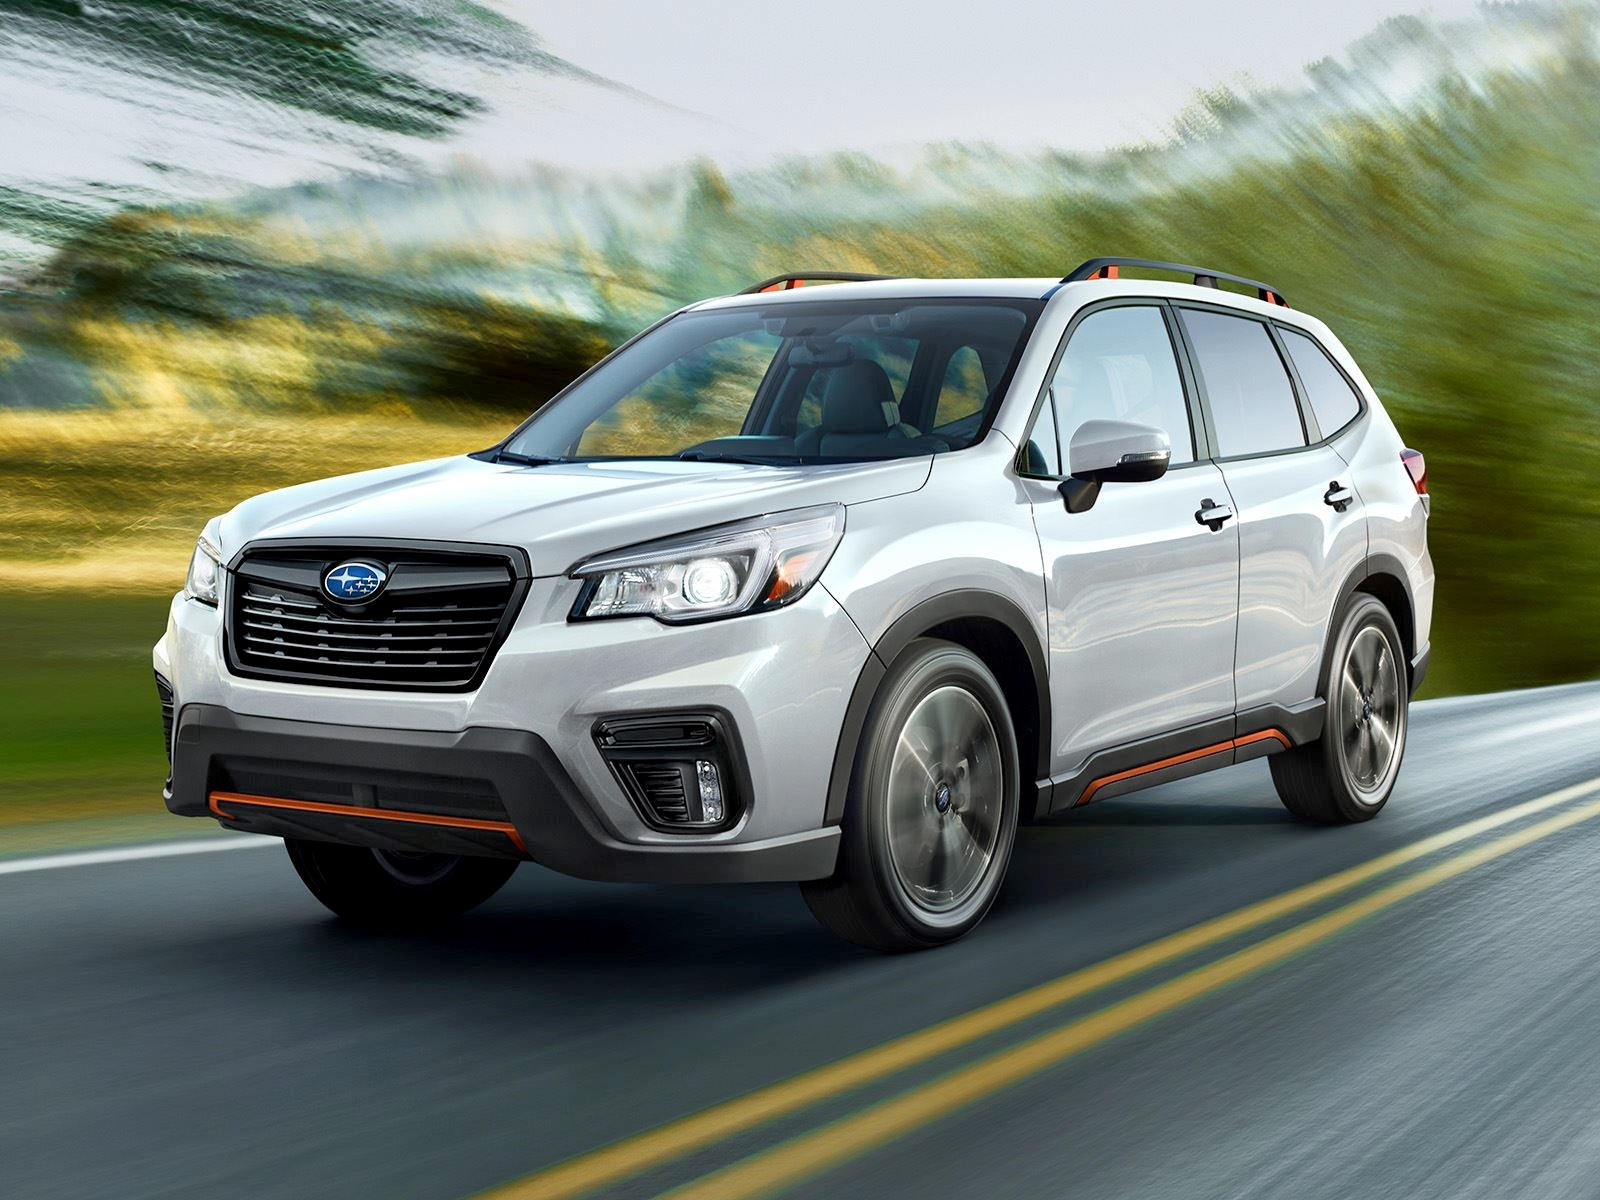 Subaru offers up two new versions of the famous Forester